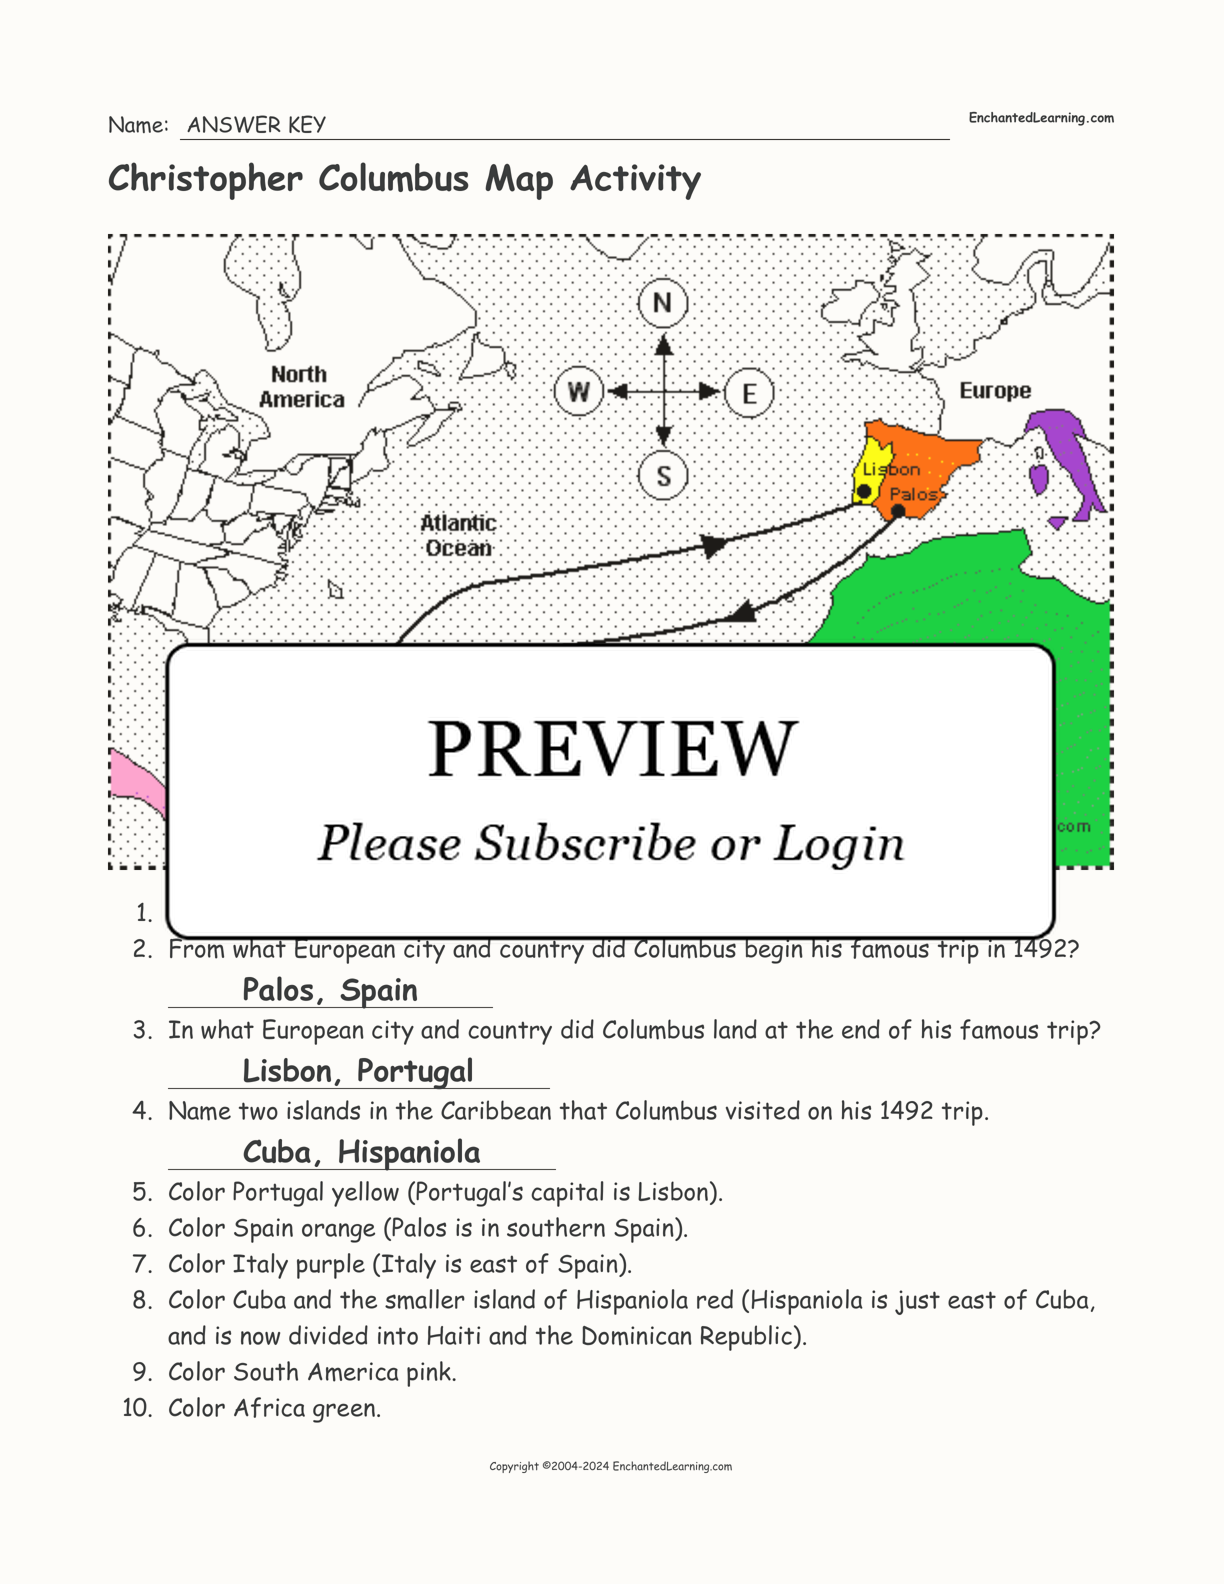 Christopher Columbus Map Activity interactive worksheet page 2